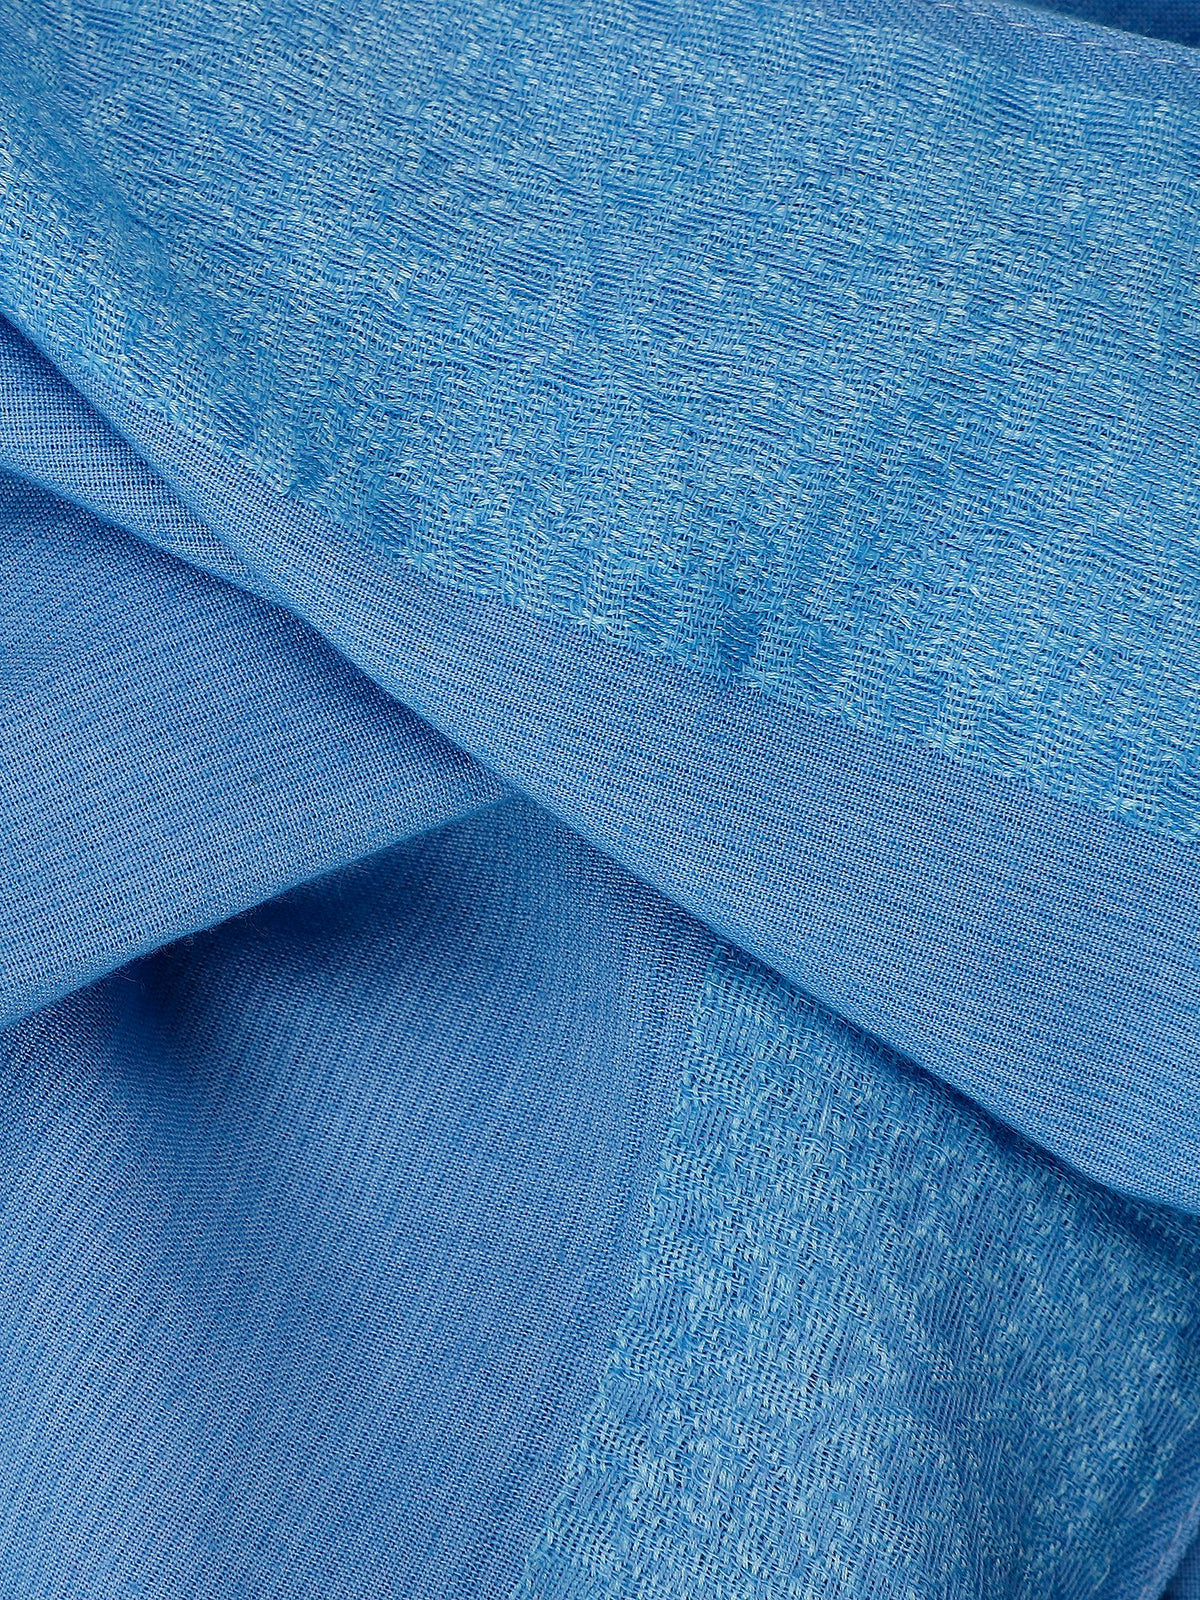 Blue viscose stole with jacquard border and hem stitched with nice-soft feel and touch